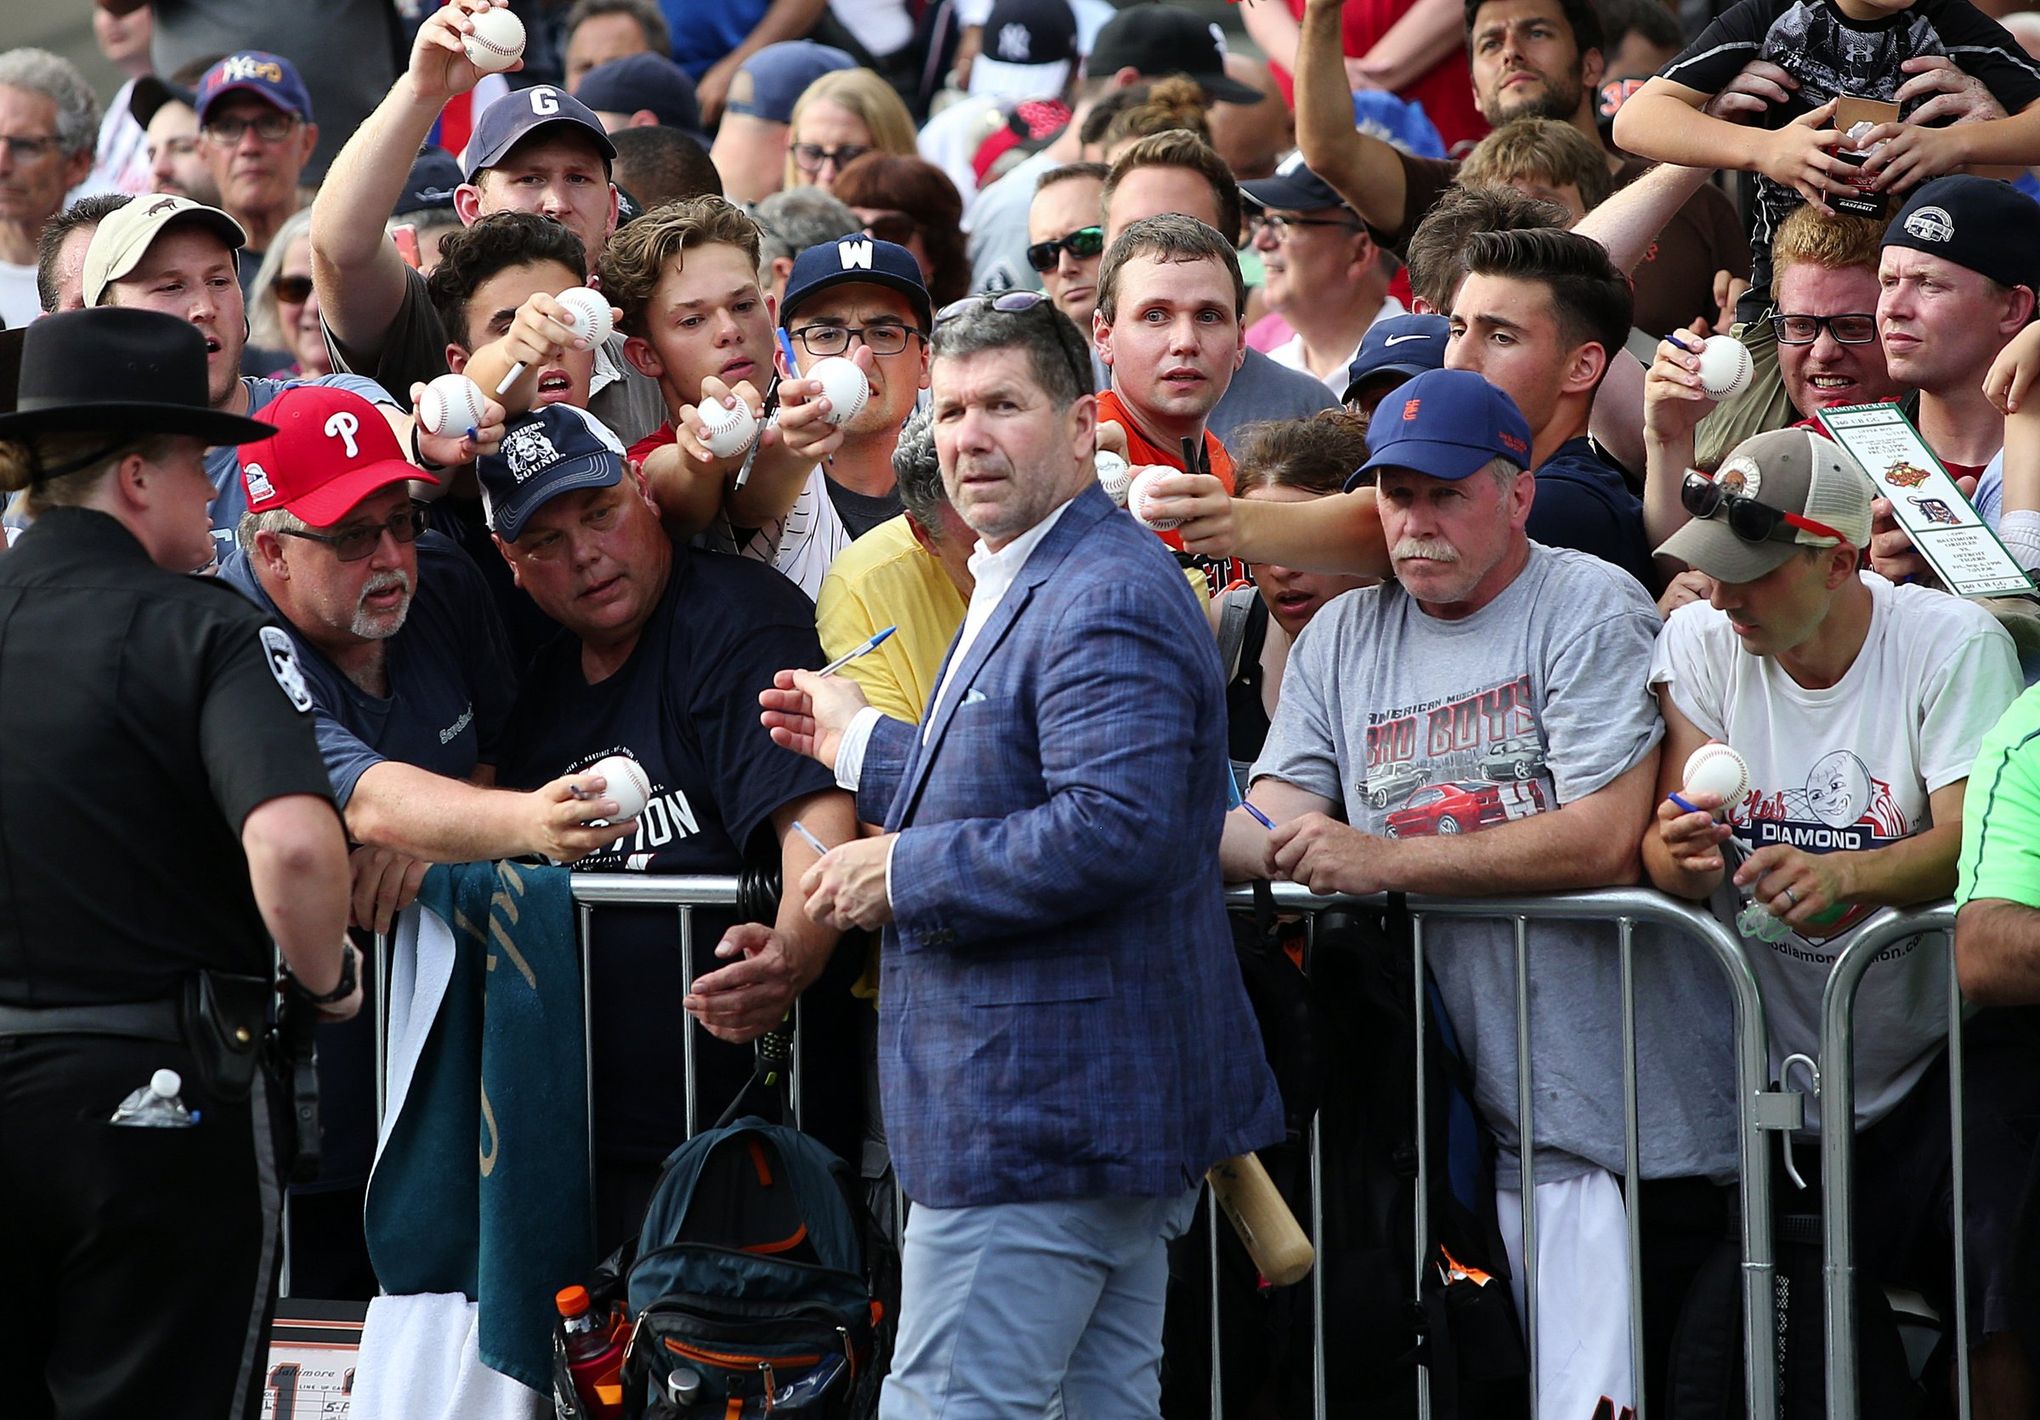 Edgar Martinez gaining ground ahead of Hall of Fame announcement, Mariners